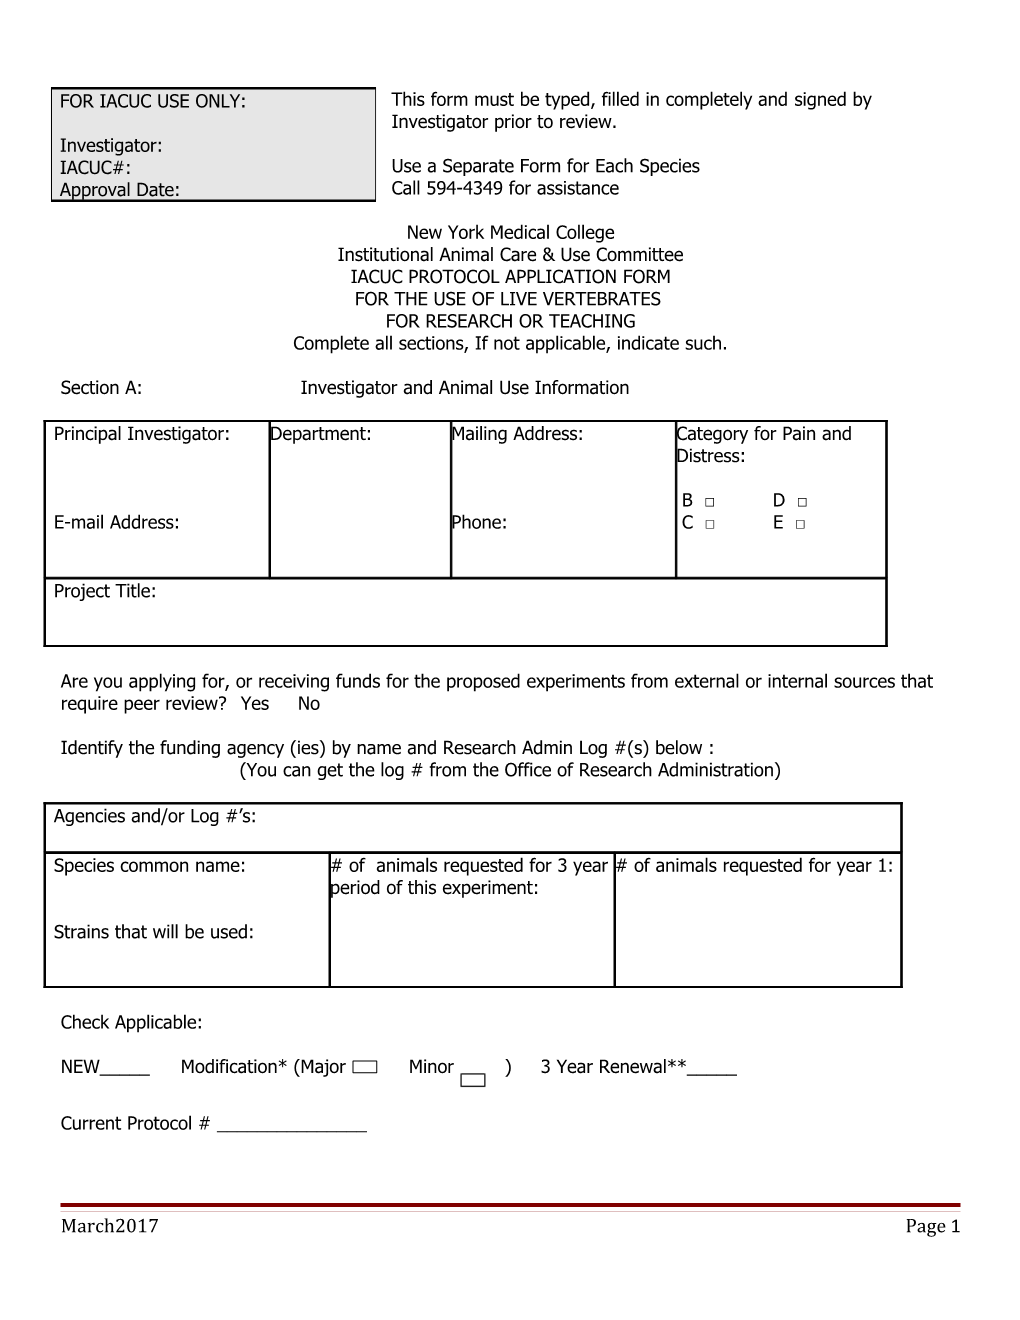 This Form Must Be Typed, Filled in Completely and Signed by Investigator Prior to Review